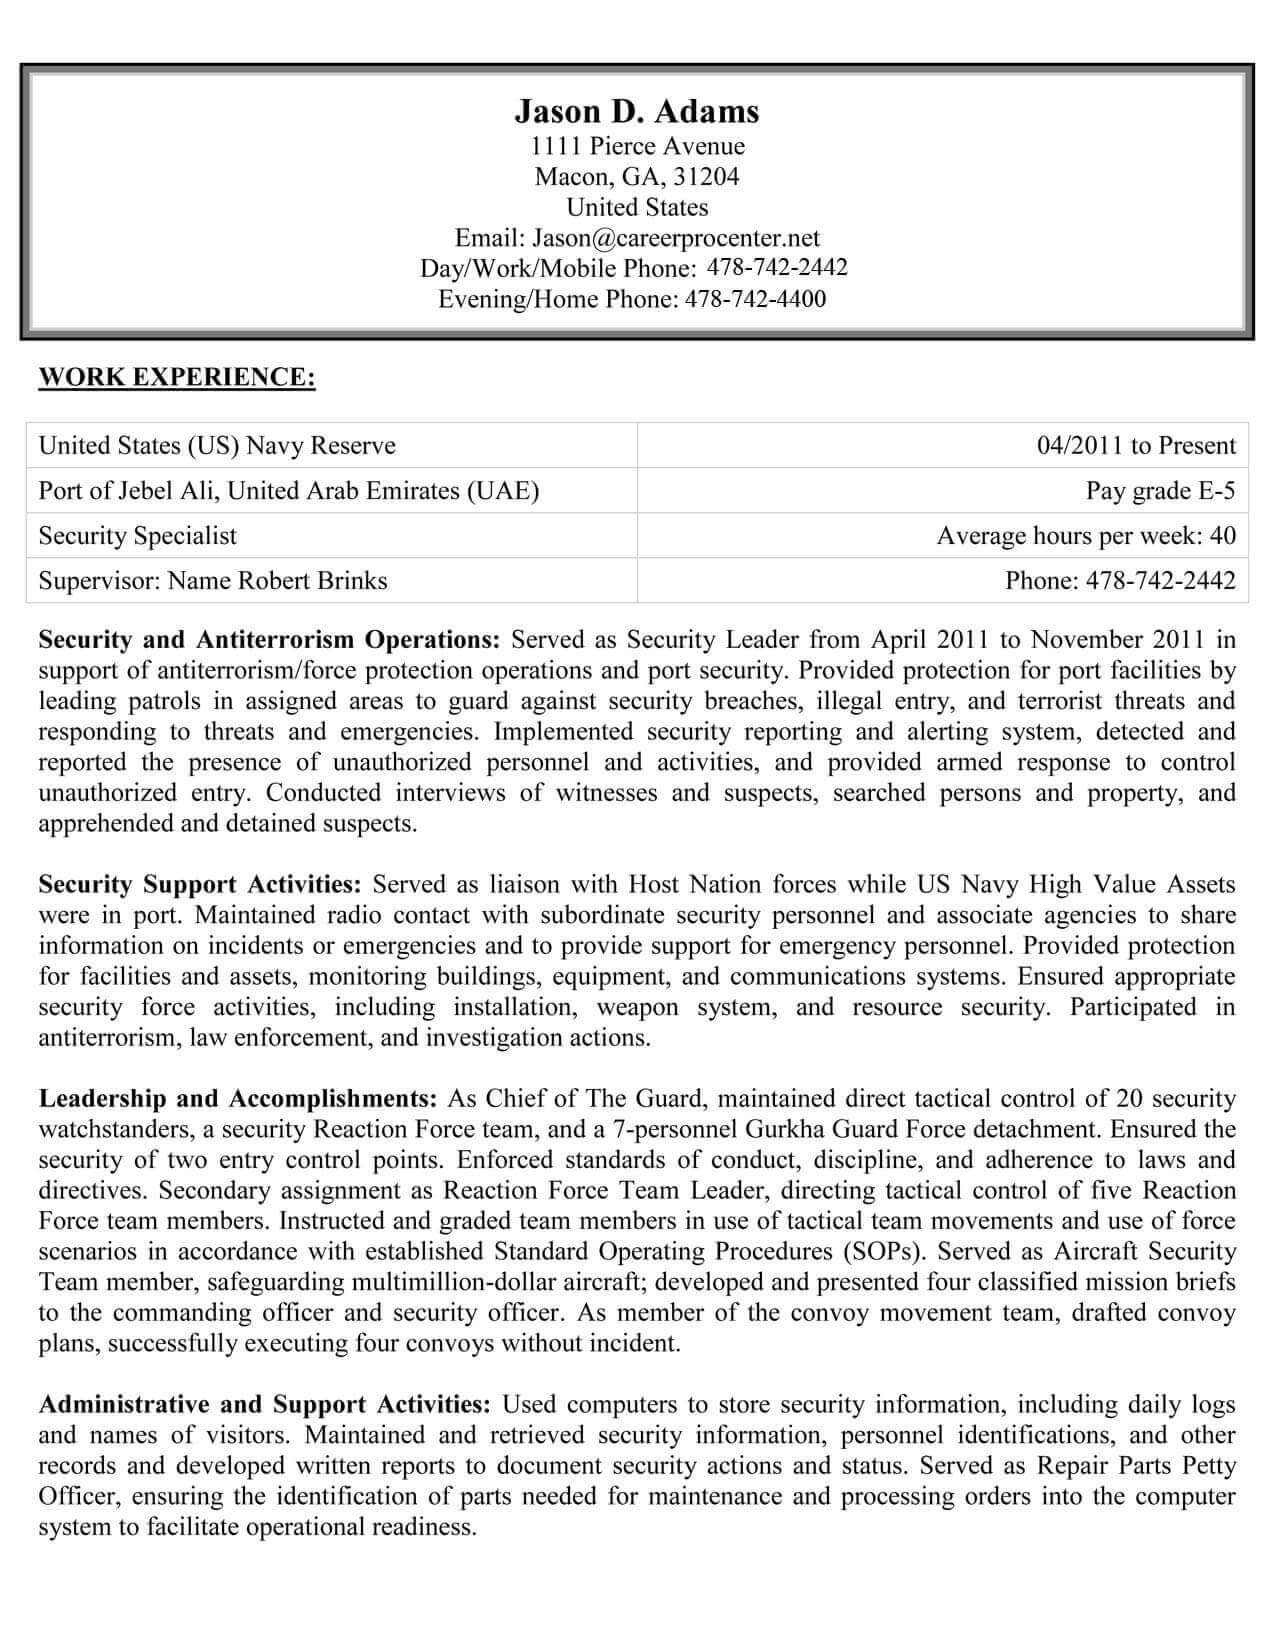 Sample Resume Sent for Government Jobs Federal Resume Tips, Examples & Templates Careerpro Plus